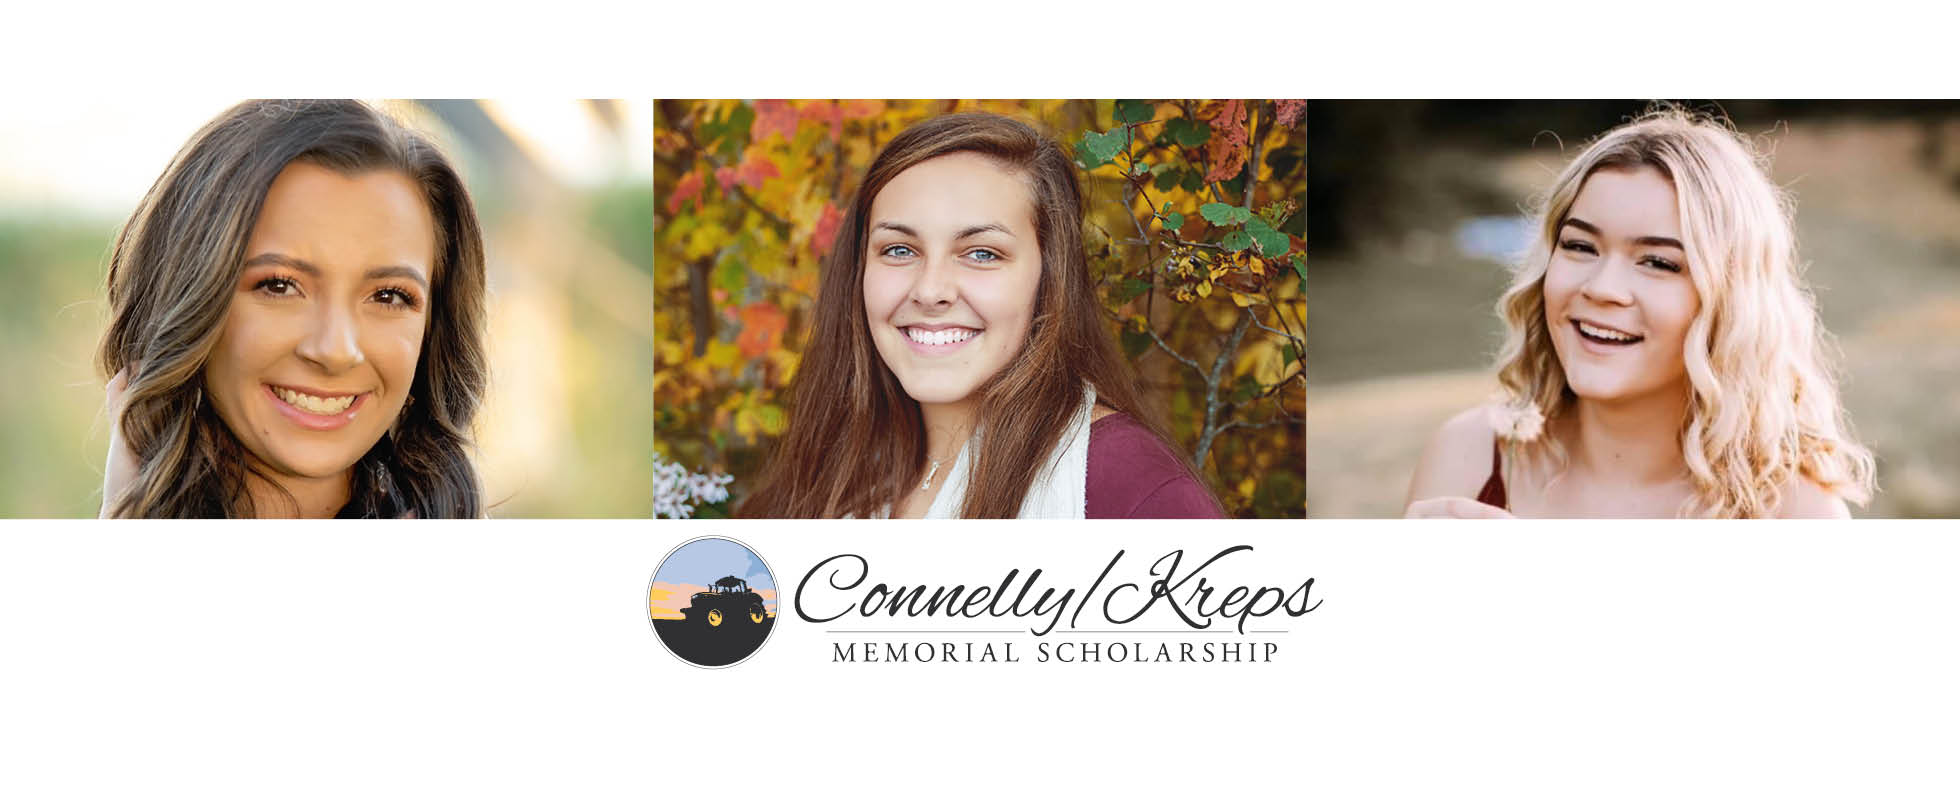 Offutt Family Foundation Awards First-Annual Connelly Kreps Memorial Scholarships